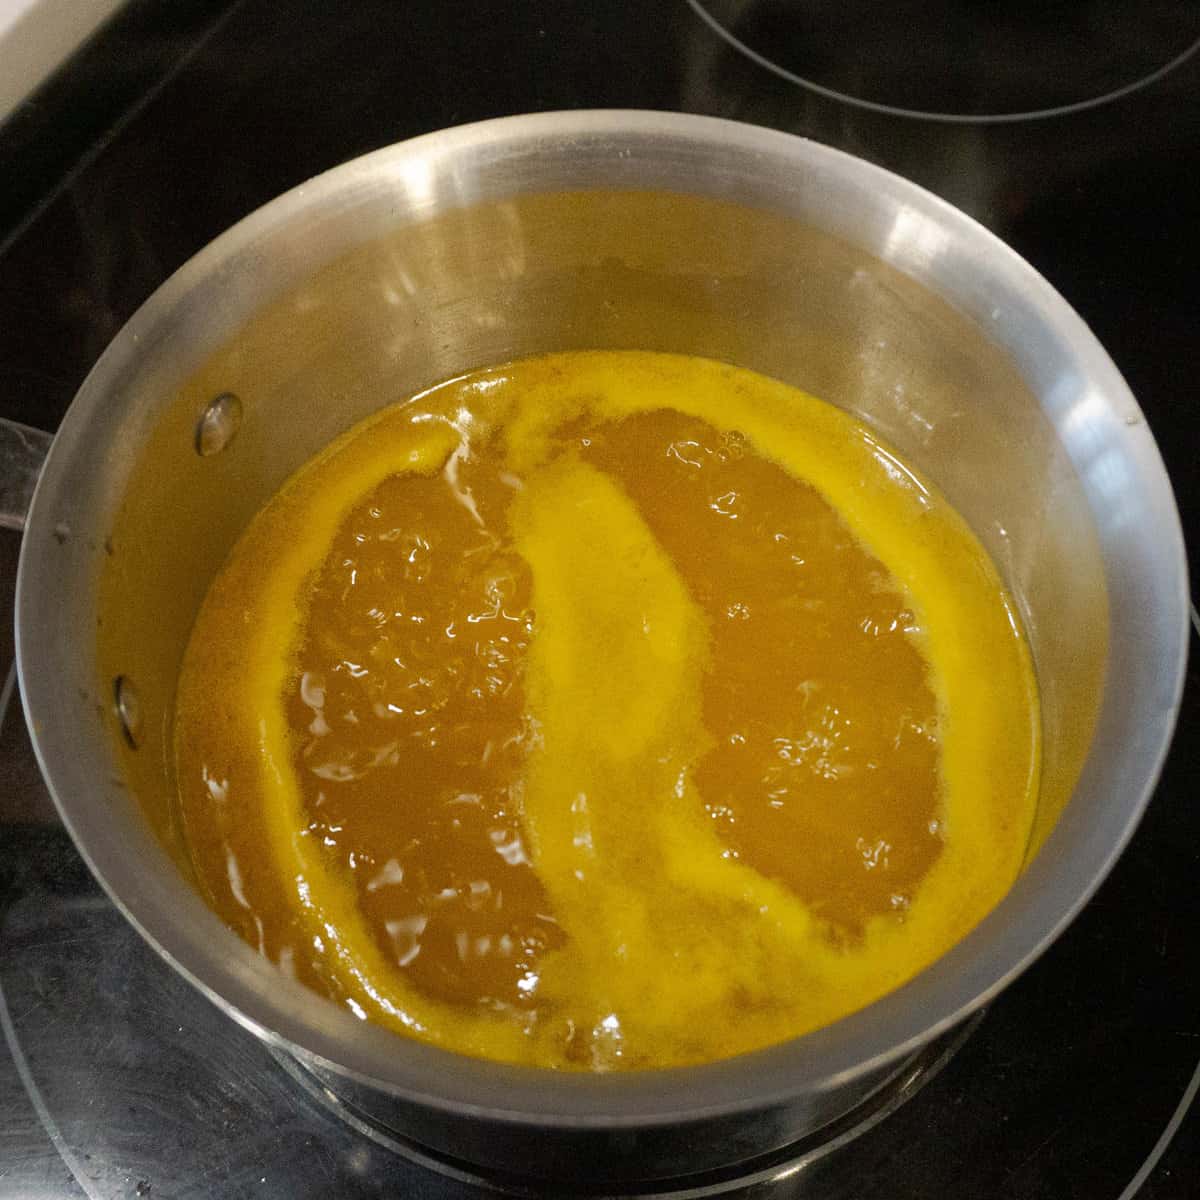 passion fruit syrup simmers at a medium heat on the stovetop